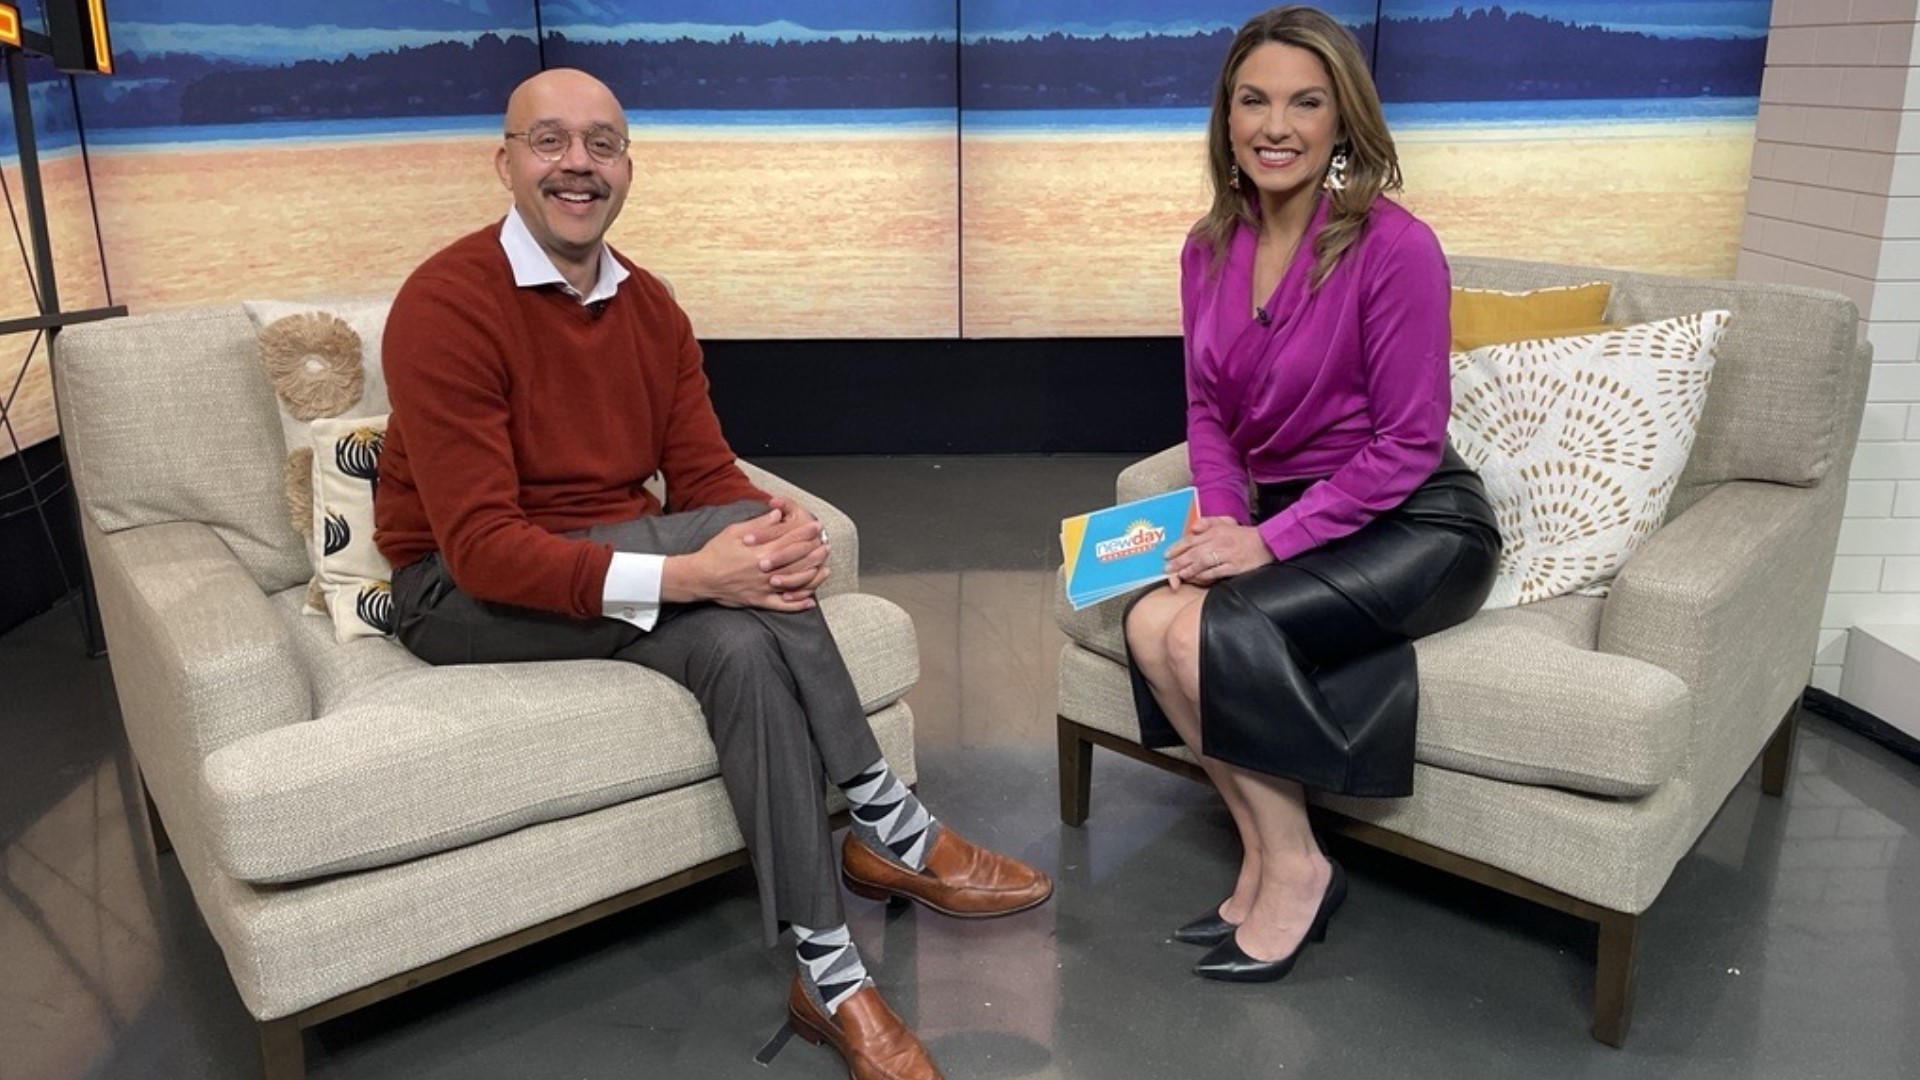 Artsfund is a group that supports the arts through leadership, advocacy, and grant making. Artsfund president Michael Greer joined the show to tell us more. #newday